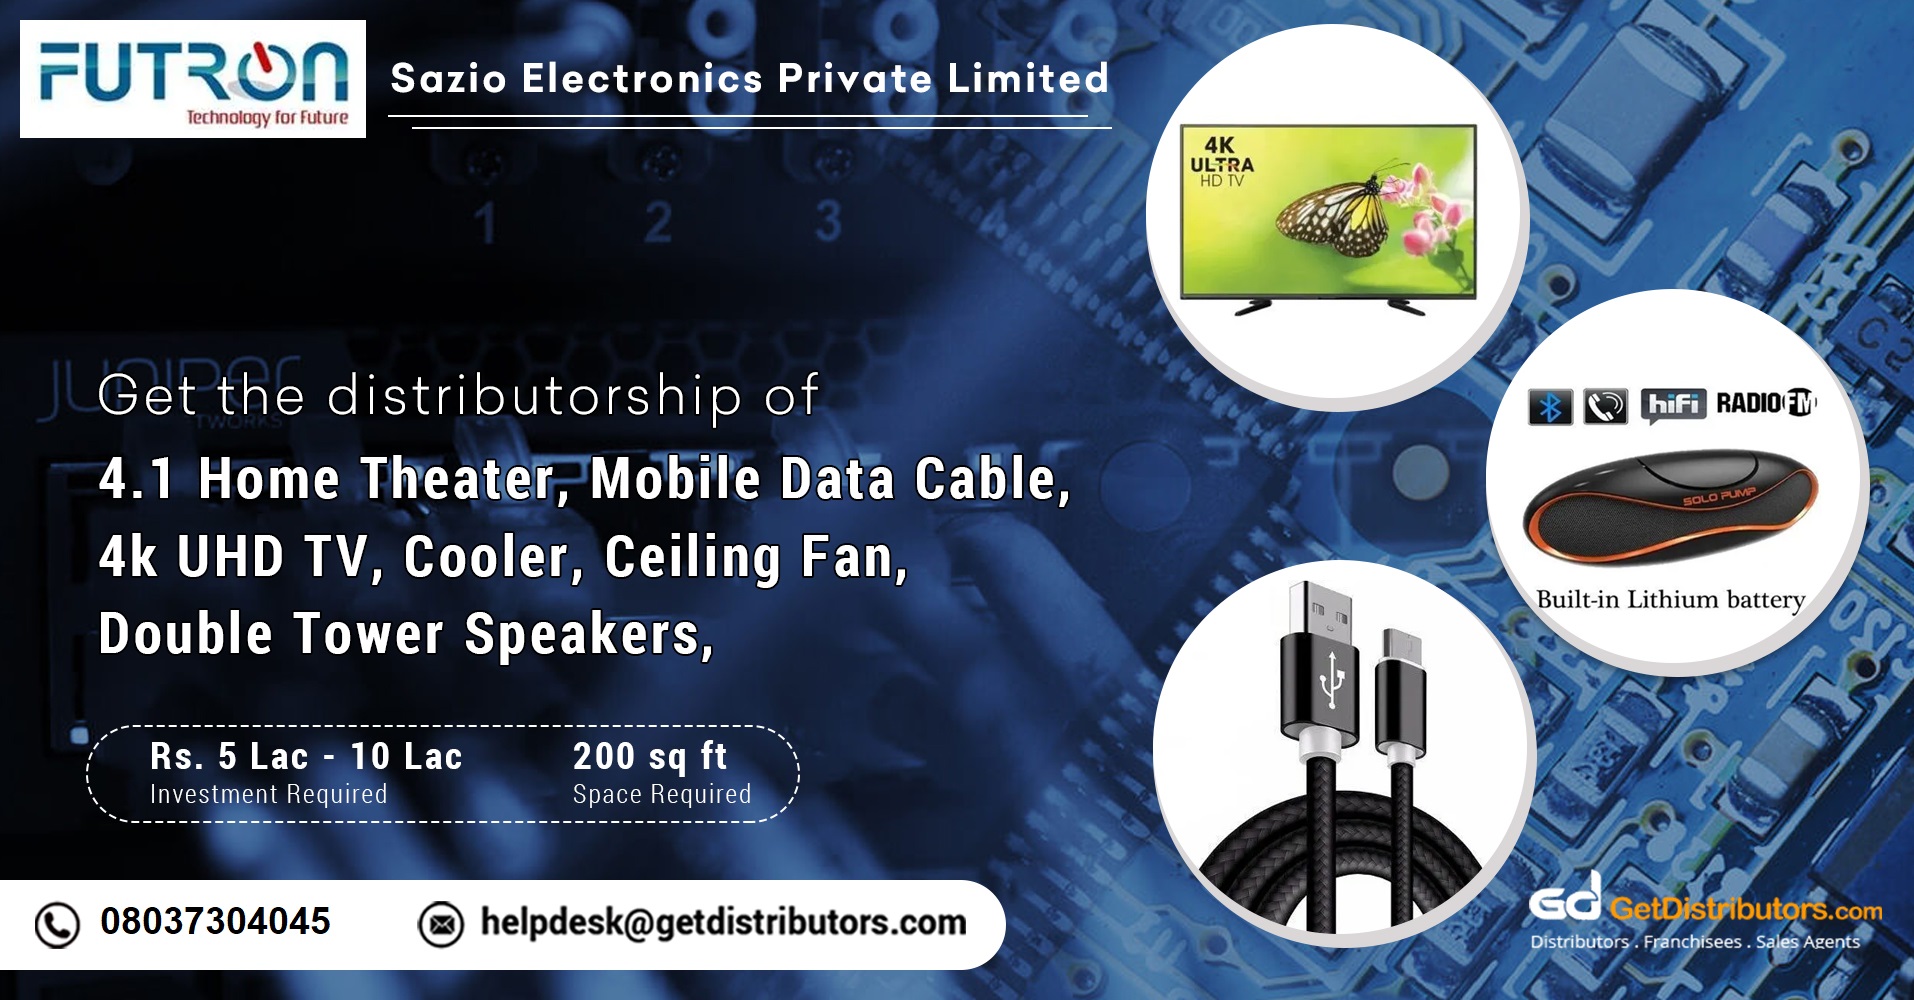 Extensive range of consumer electronics and mobile accessories for distribution